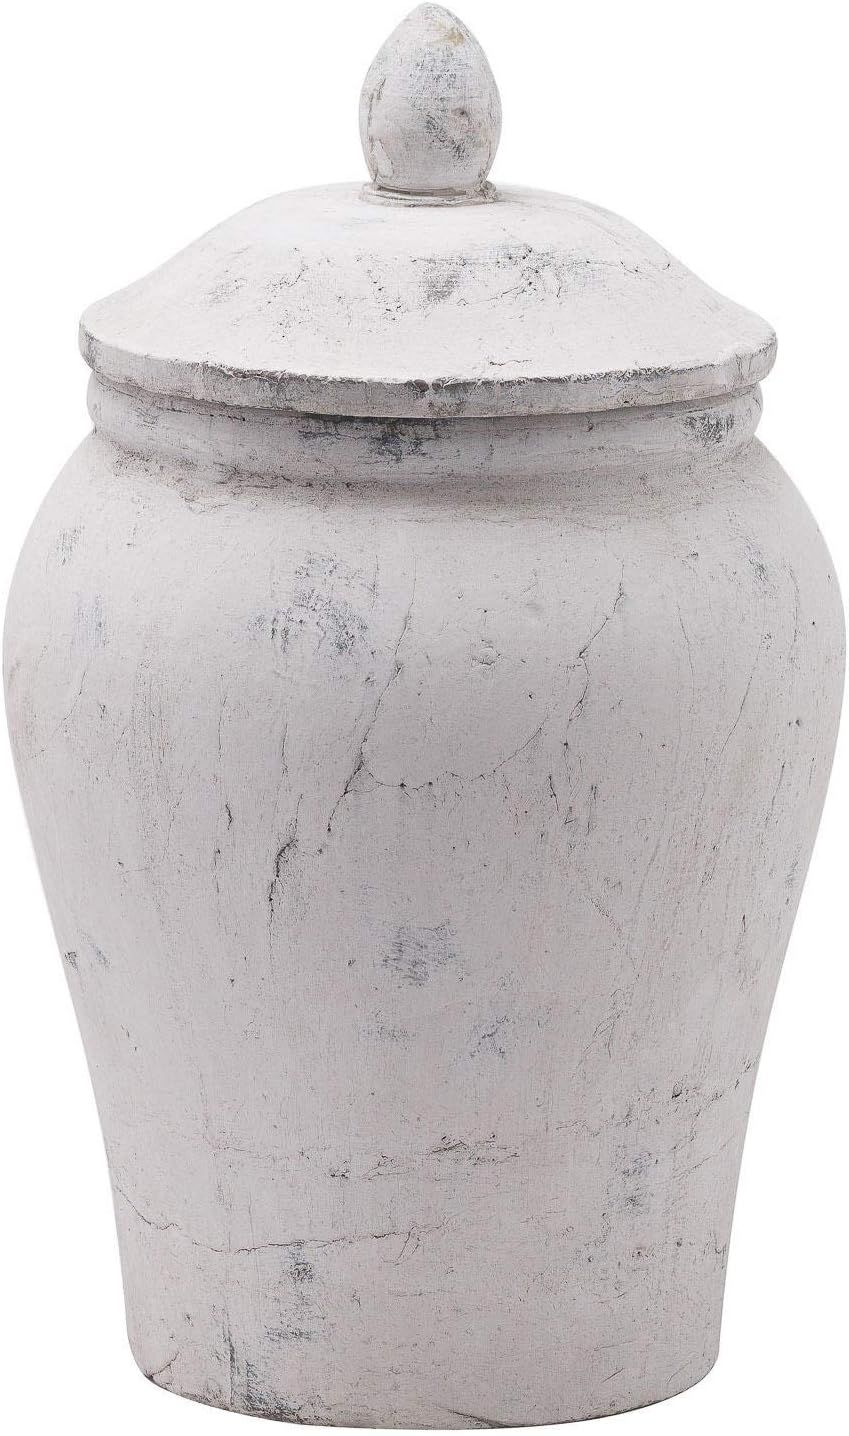 Hill 1975 Bloomville Stone Ginger Jar, One Size, Multi - Colour | Amazon (US)